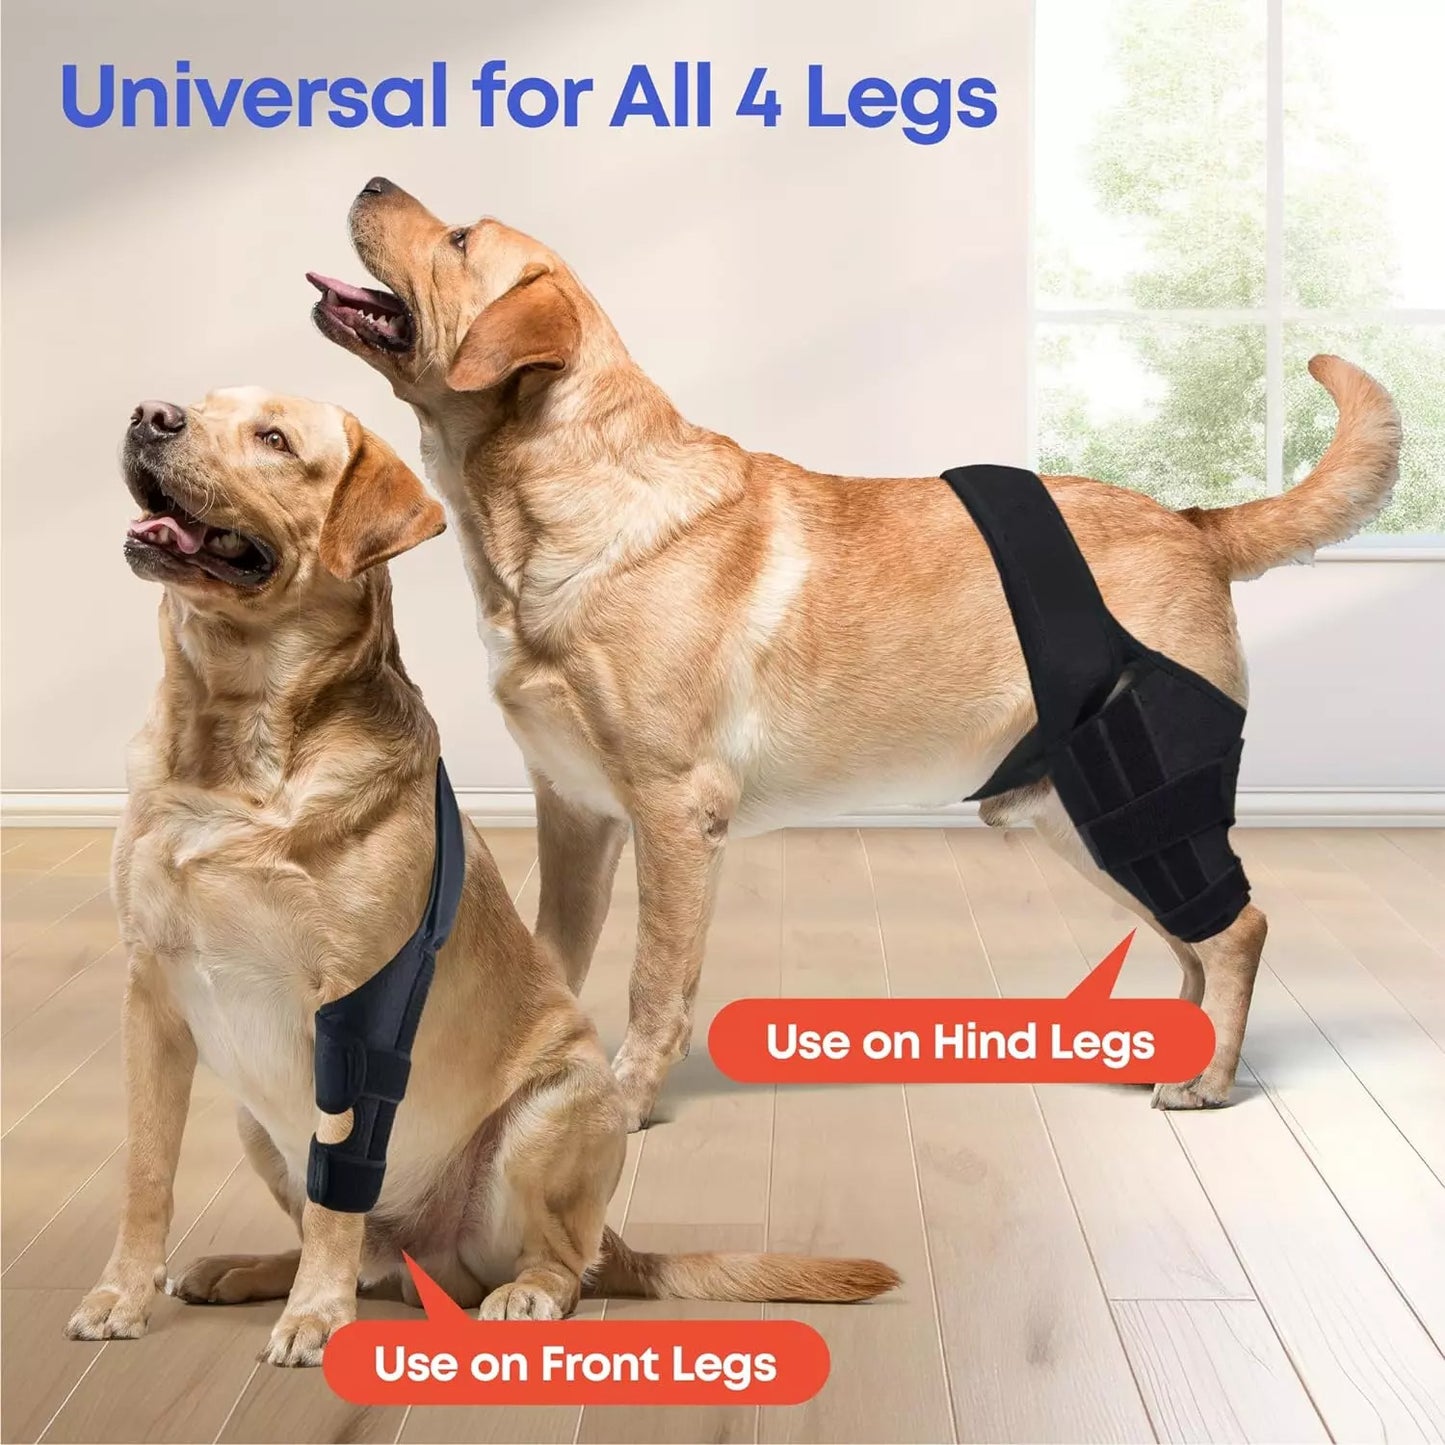 Best Dog Knee Brace for Torn ACL or Arthritis – Durable, Lightweight, and Adjustable ACL Support – Improve Mobility and Stability